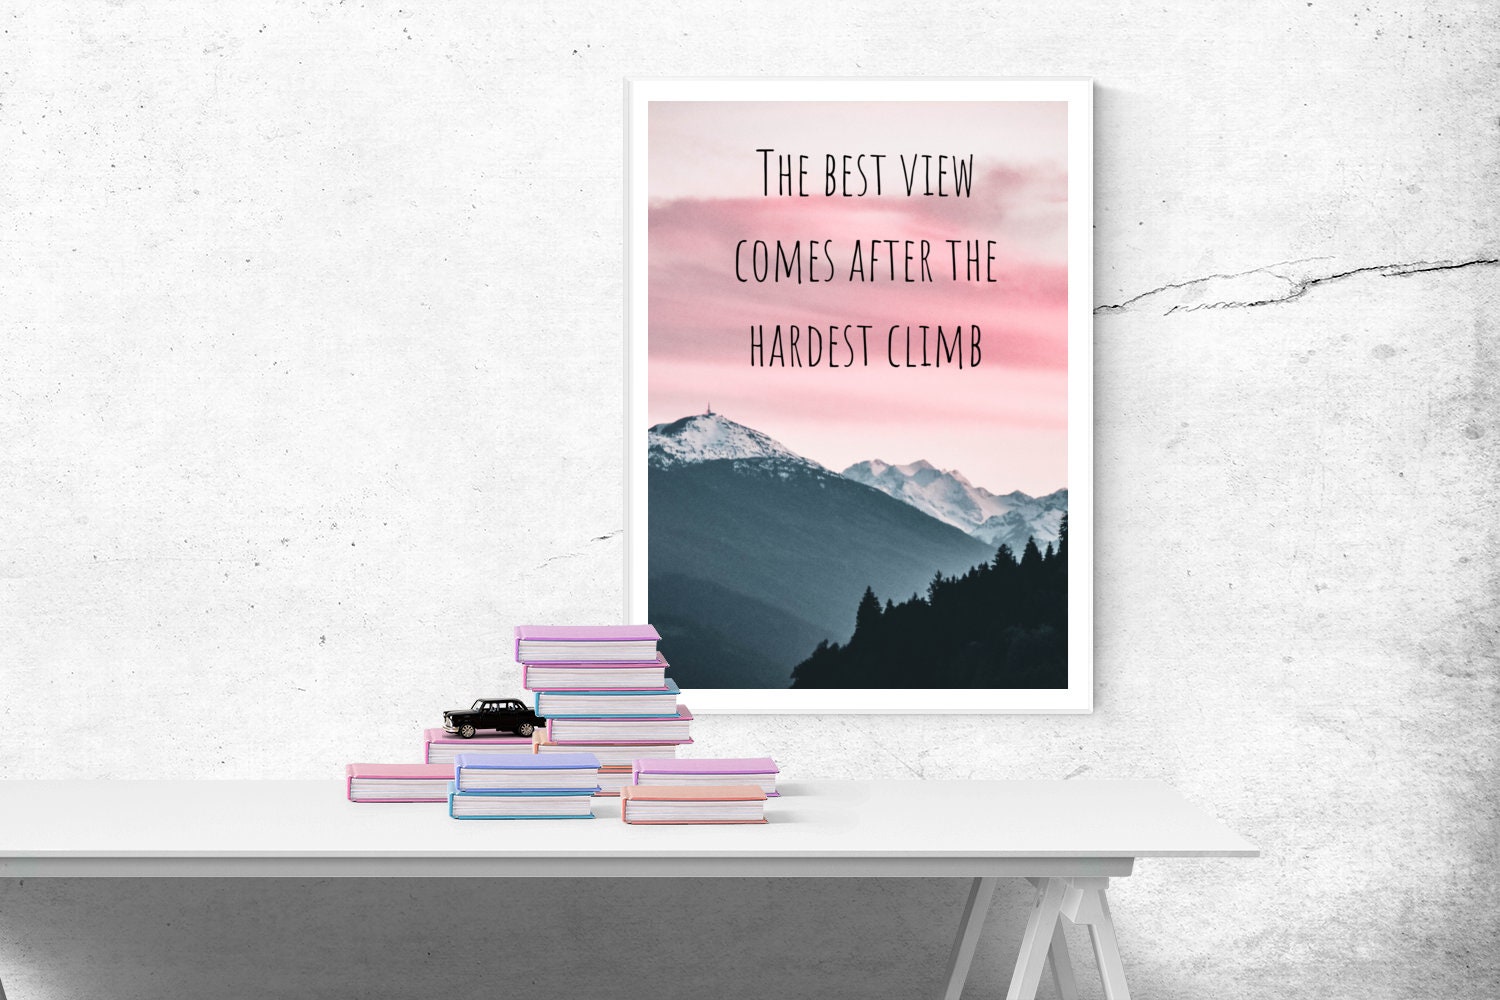 The Best View Comes After The Hardest Climb Poster Wall Print|Inspirational Motivational Gym Classroom Home Office Dorm|18 X 12 In|SJC158